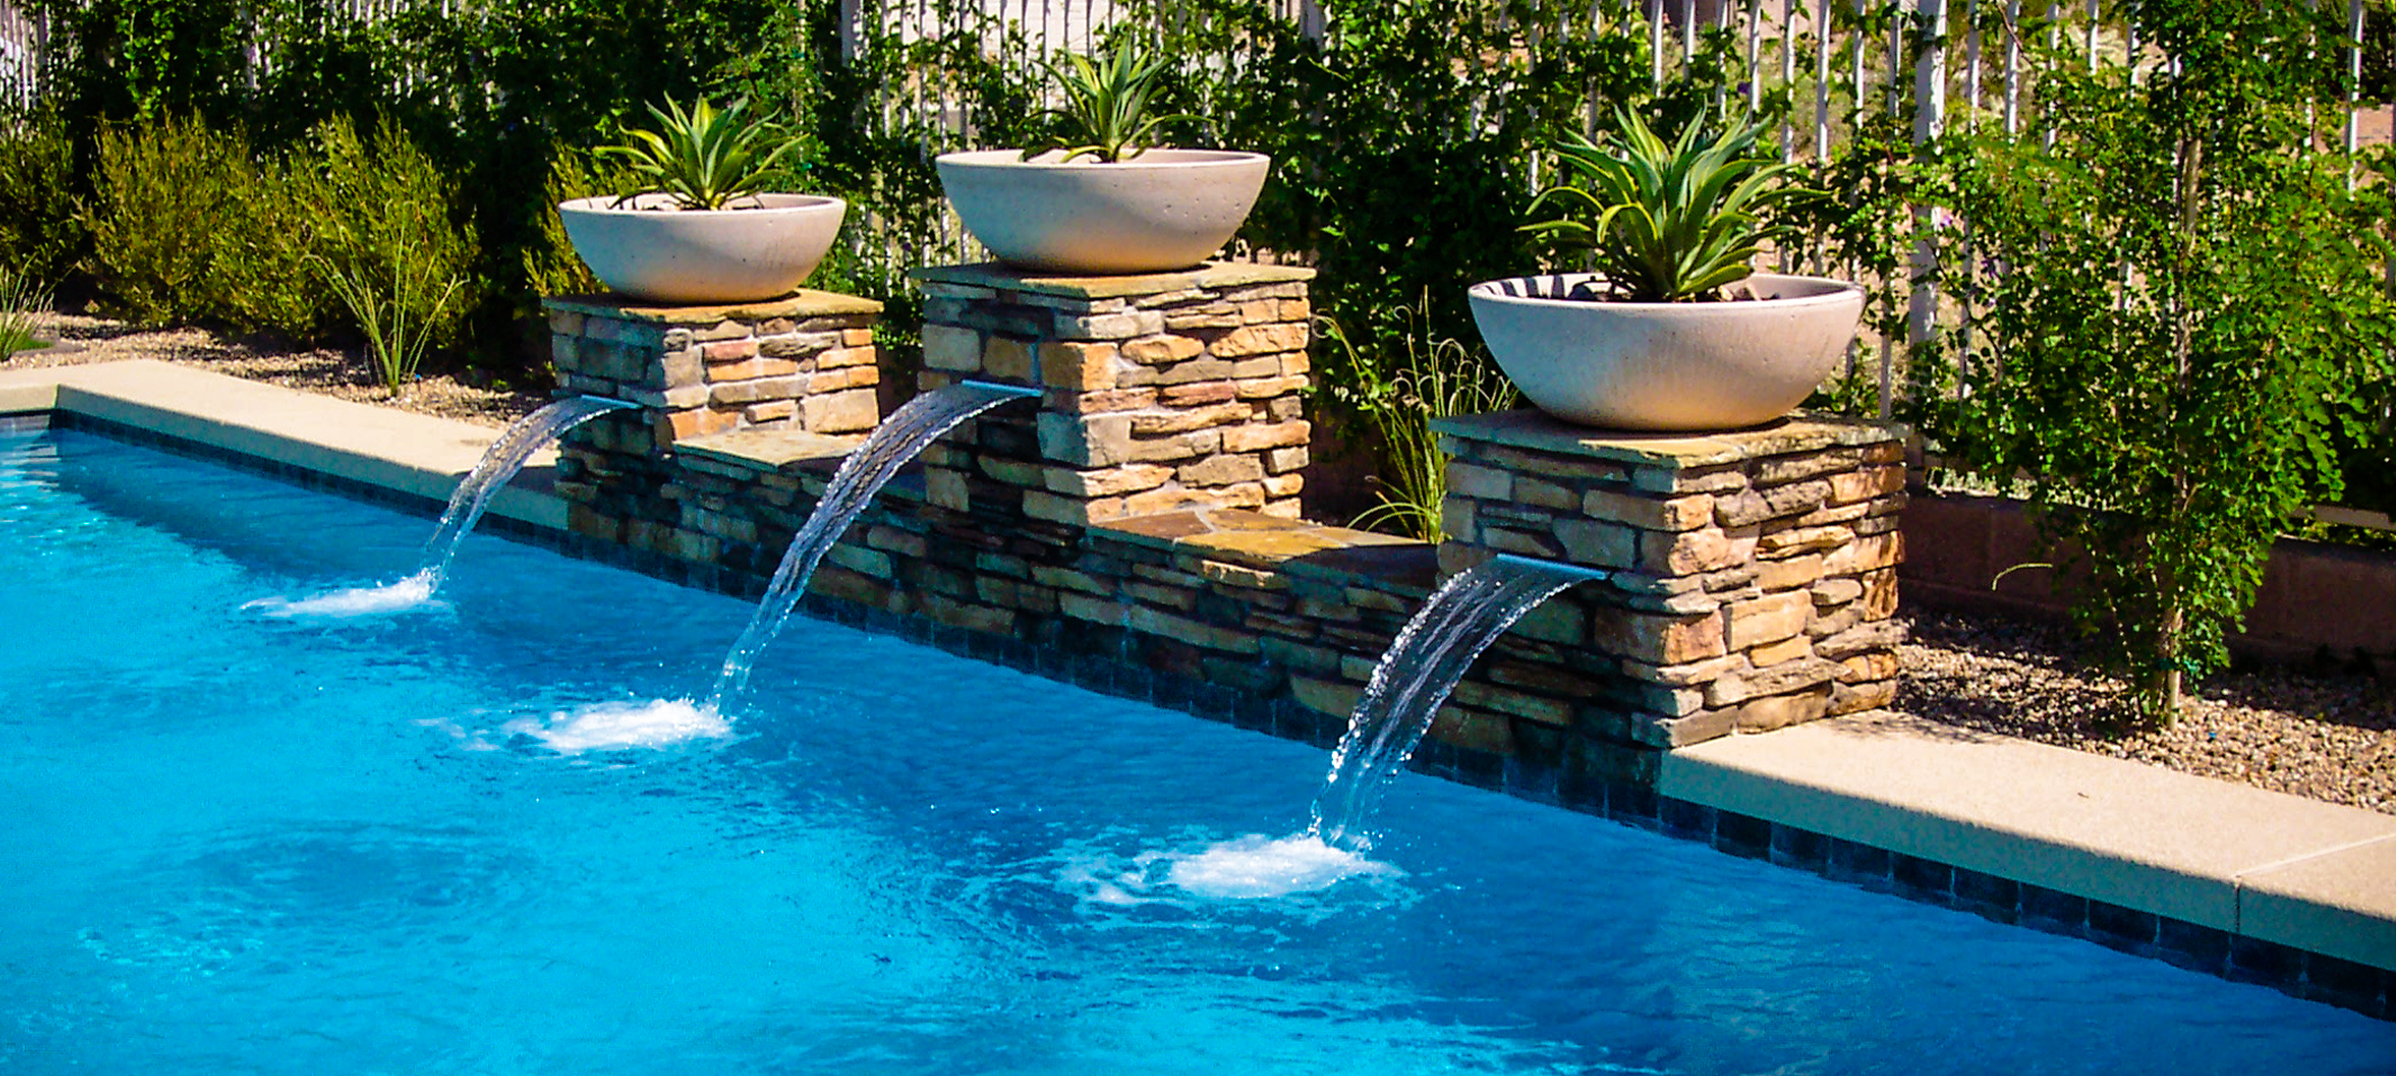 water features for backyard